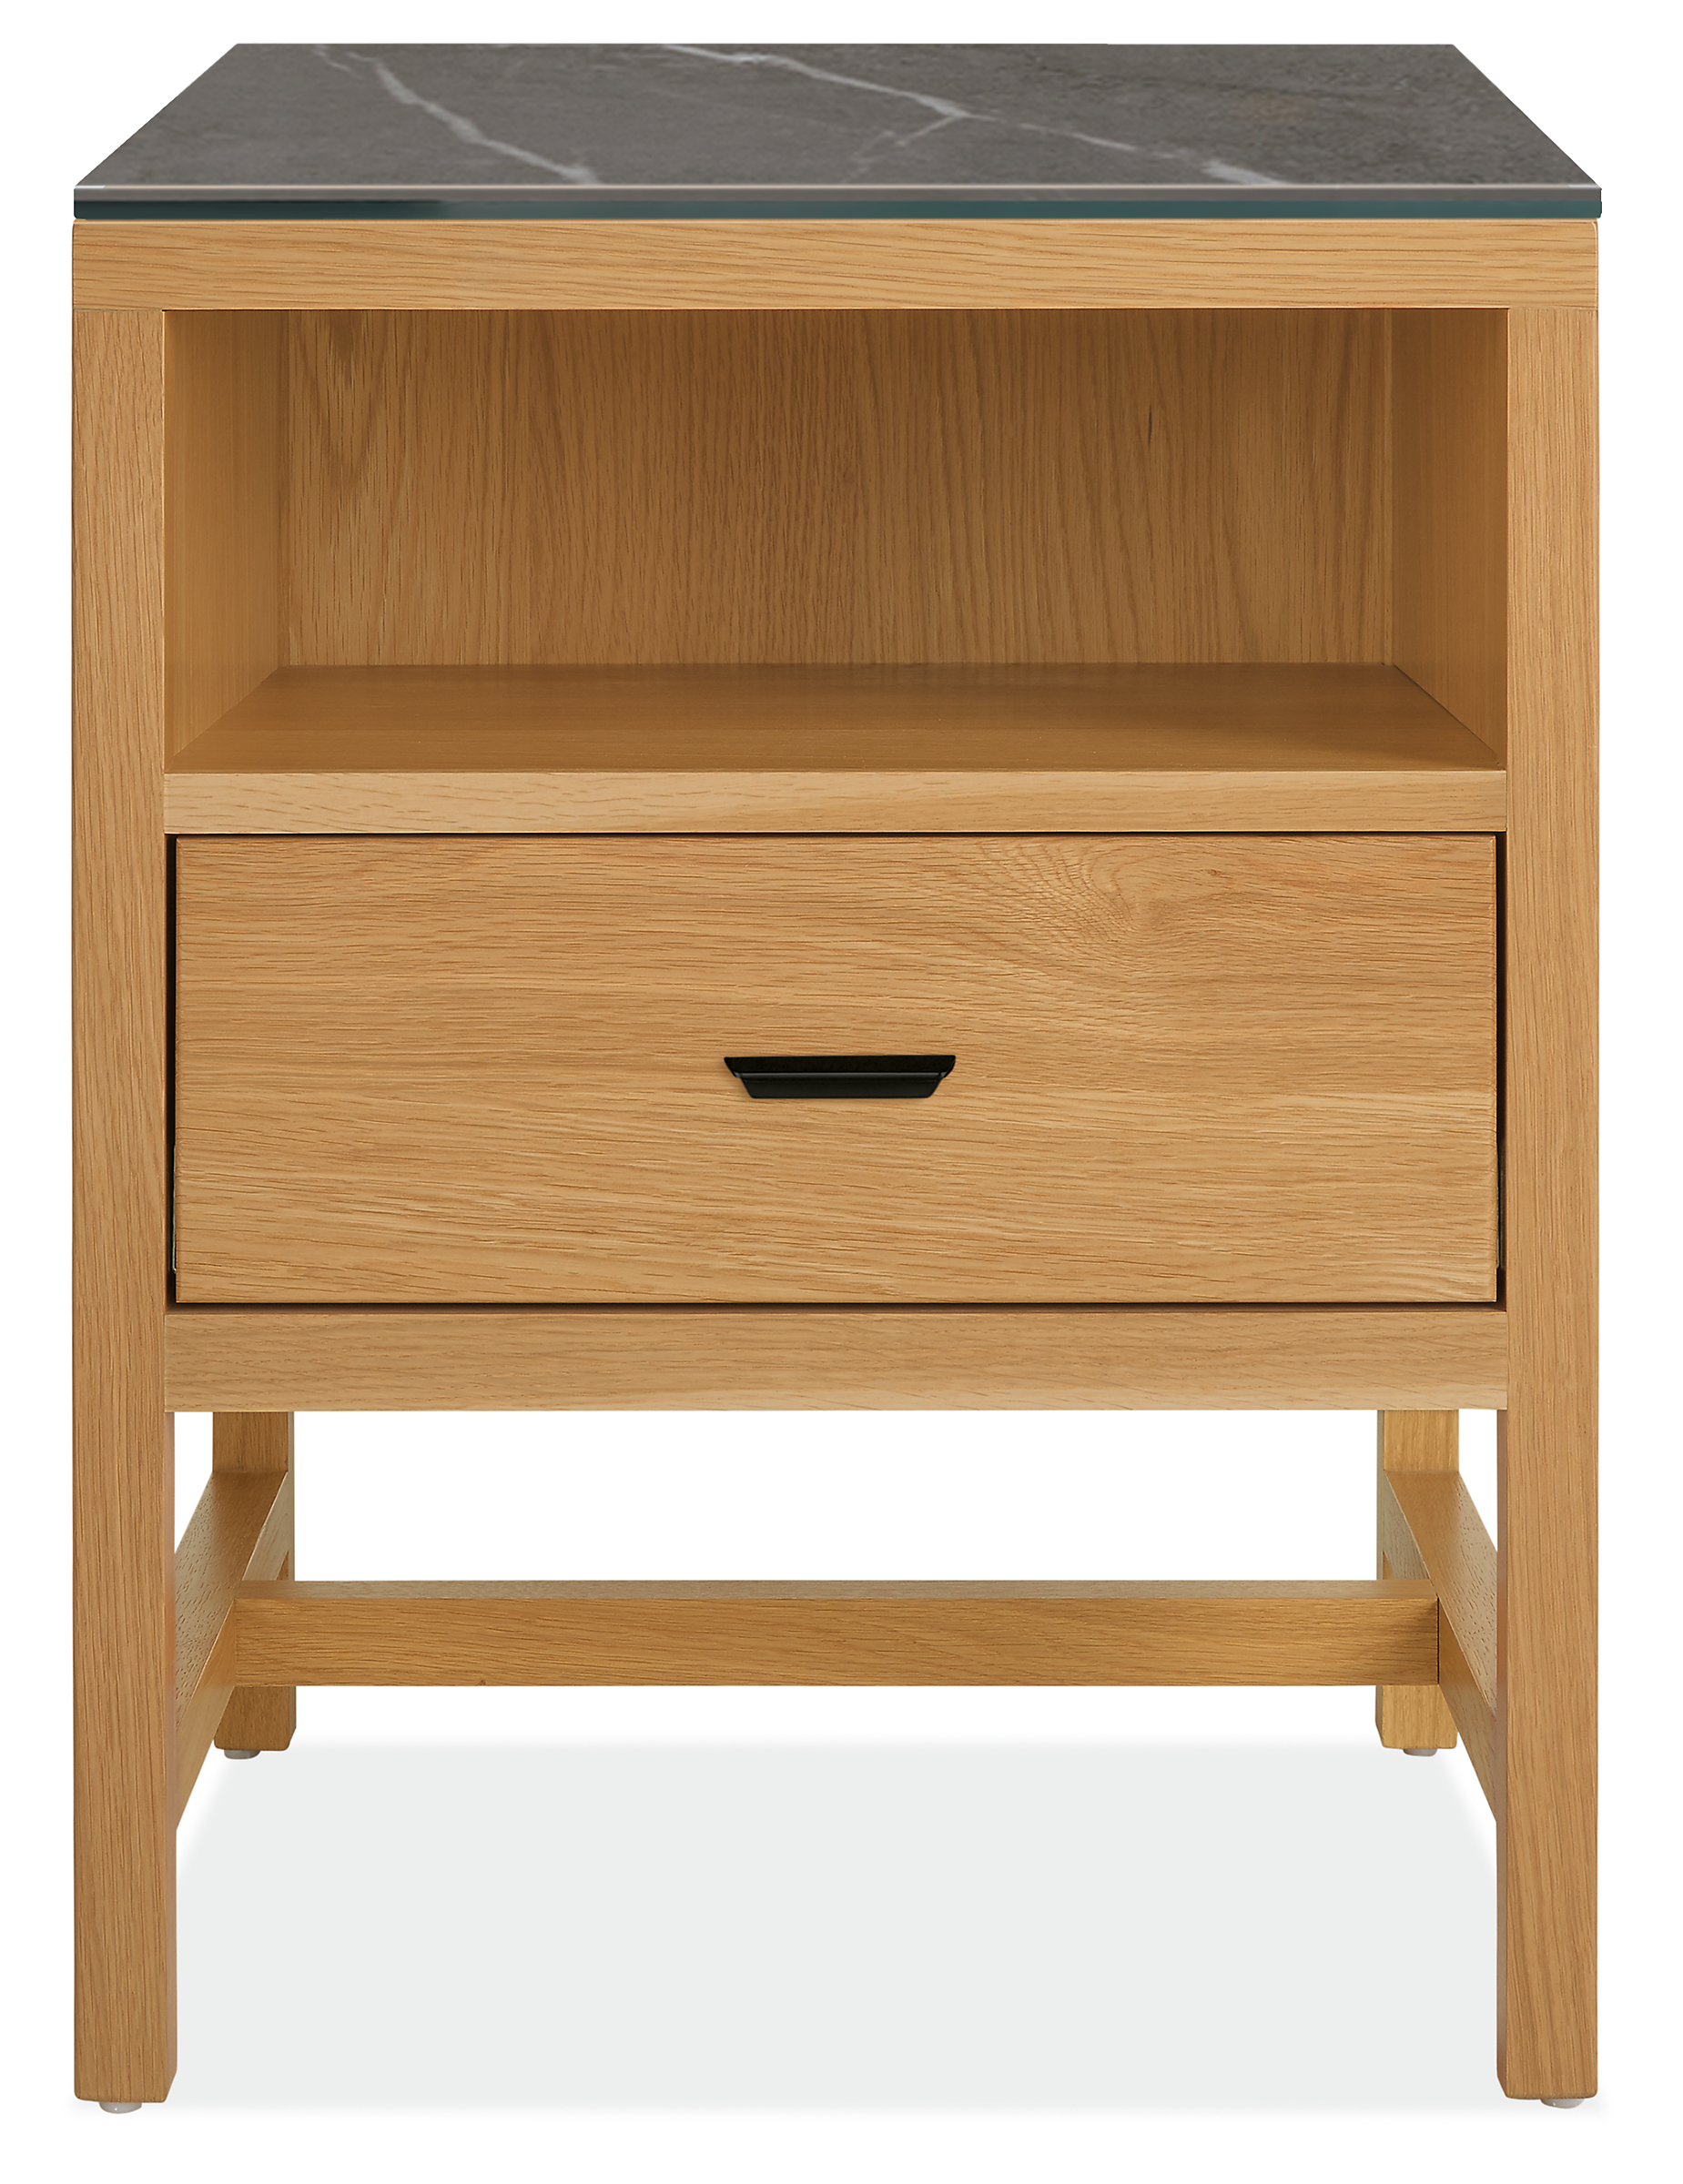 Berkeley 20w 19d 25h One-Drawer Nightstand with Top Option